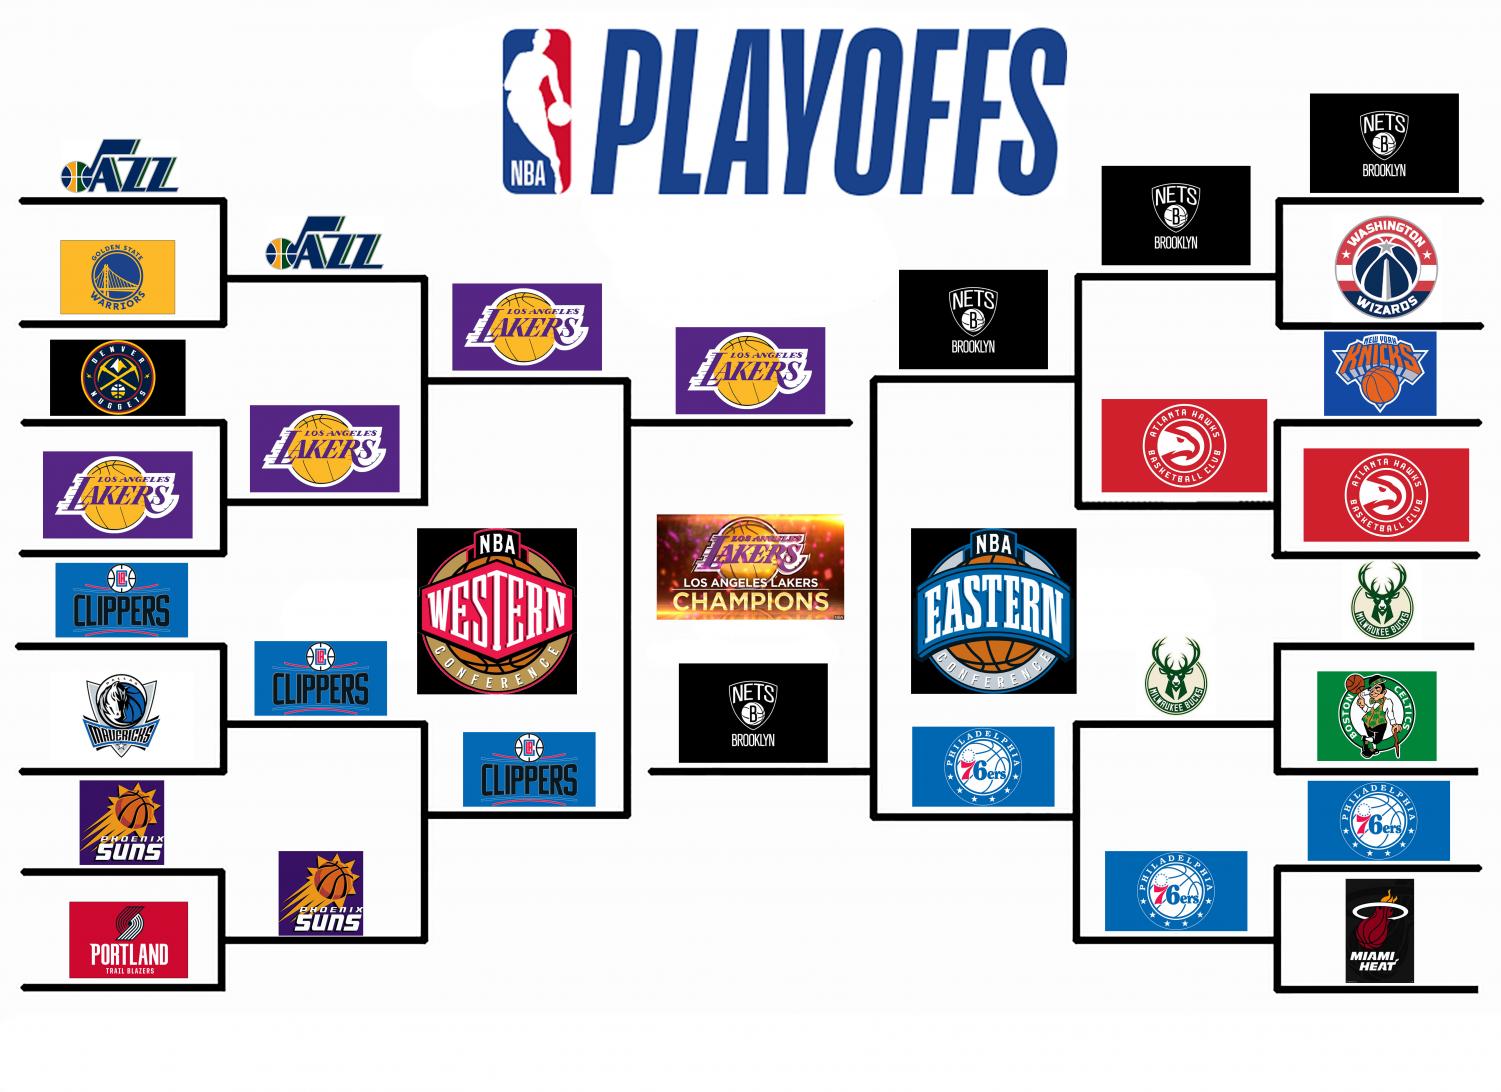 playoff predictions 2023